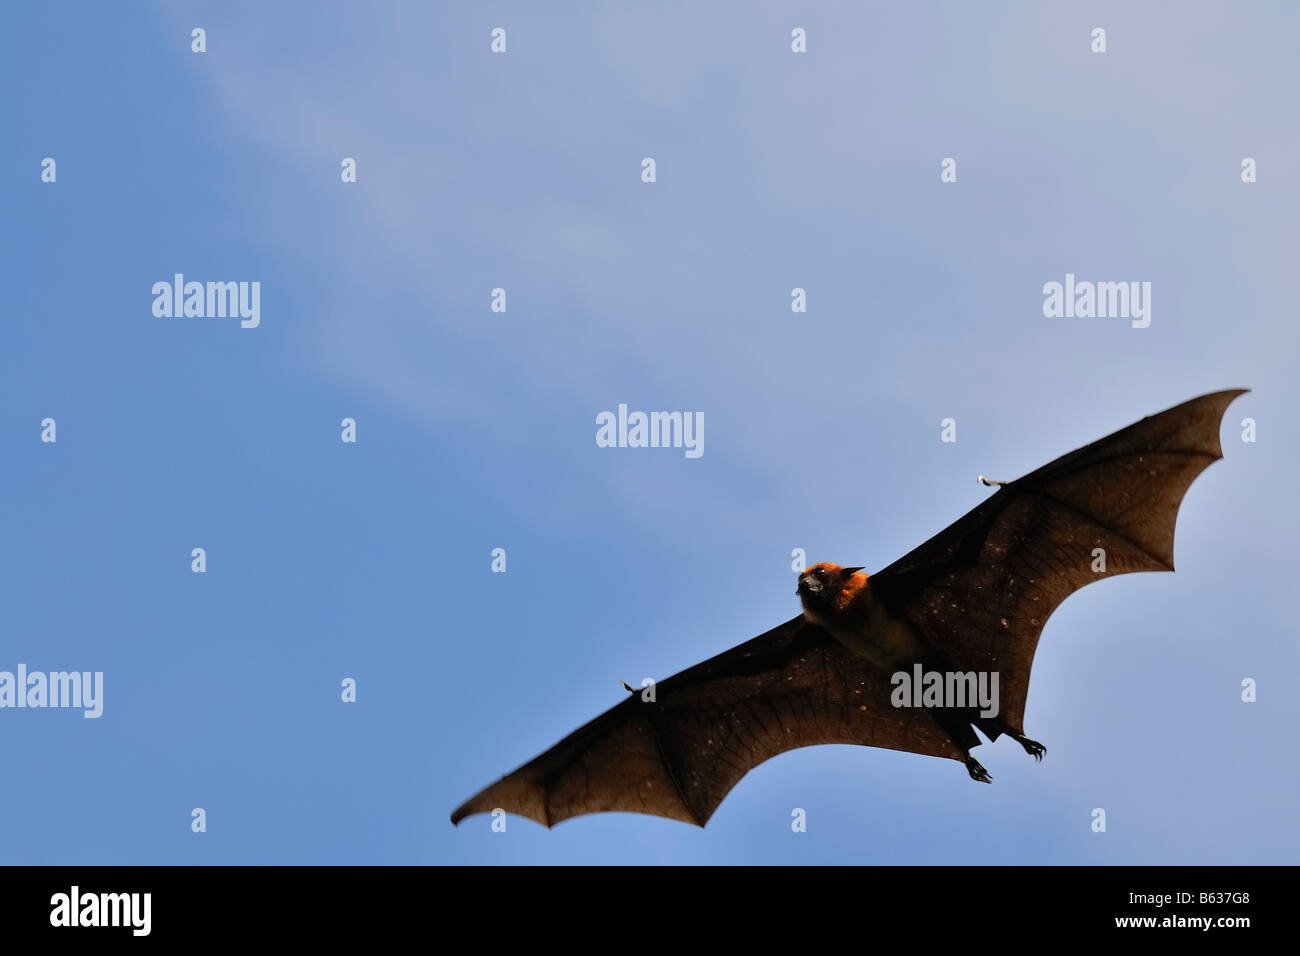 Flying foxes / fruit bats in Thailand Stock Photo